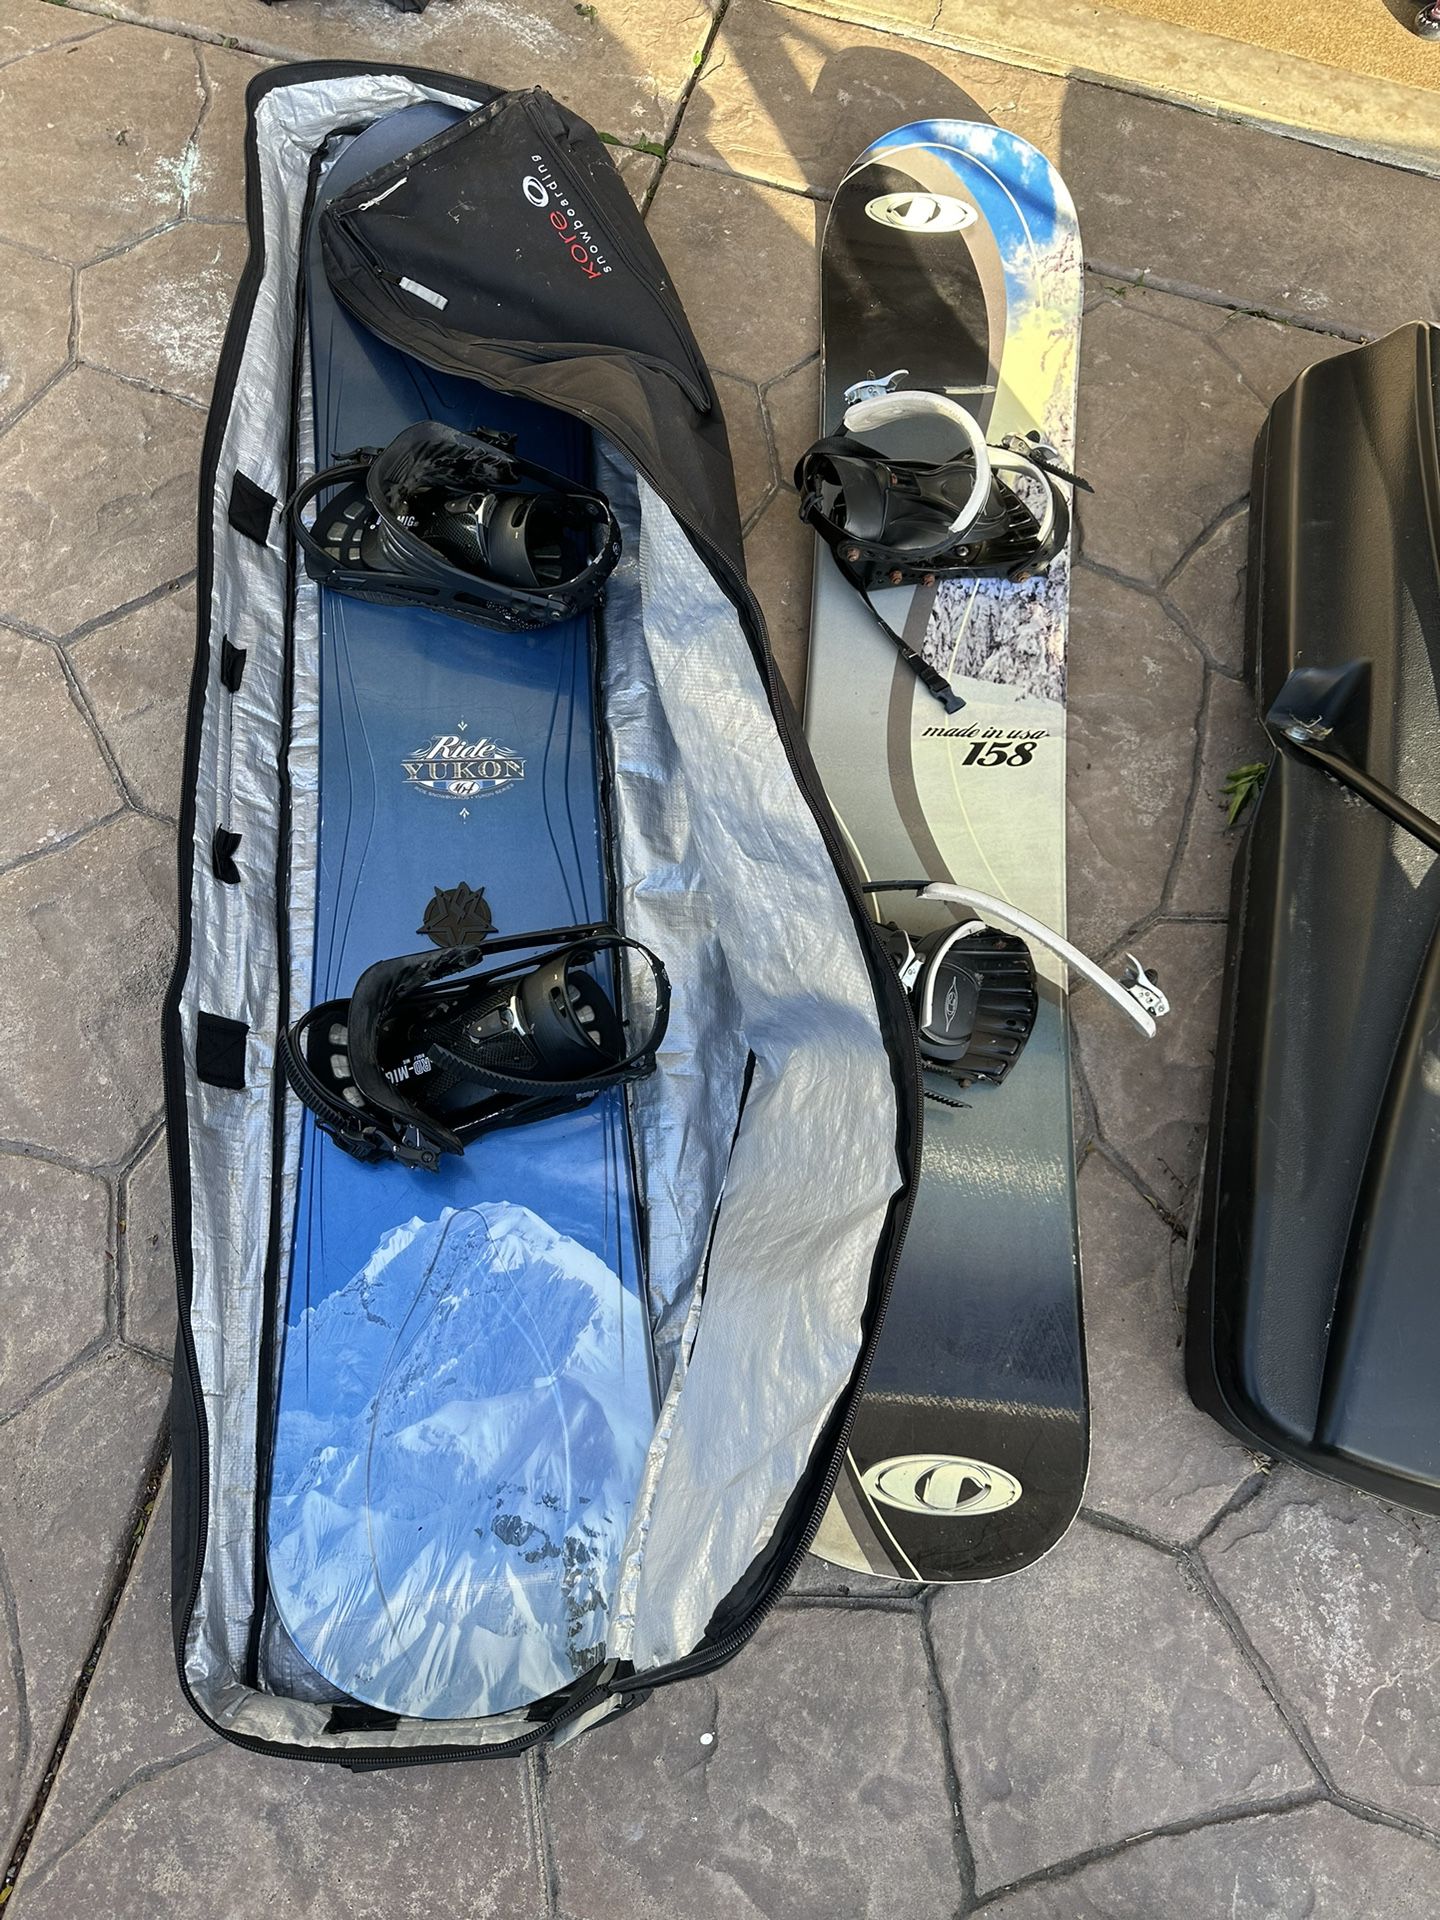 2 Snowboards And Bag